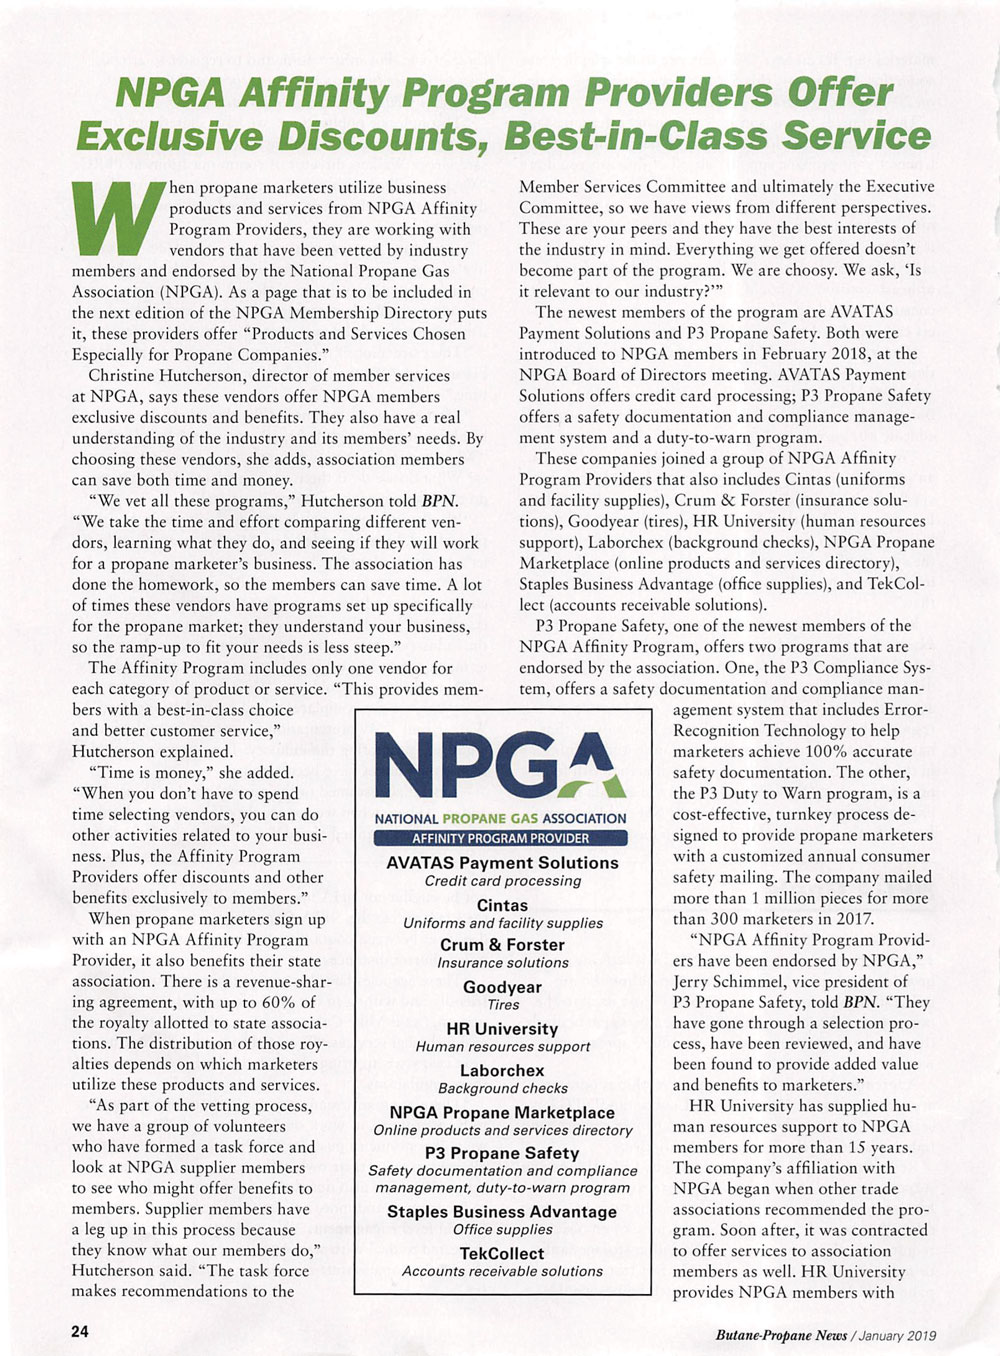 NPGA Affinity Program Providers Offer Exclusive Discounts, Best-in-Class Service, BPN January 2019